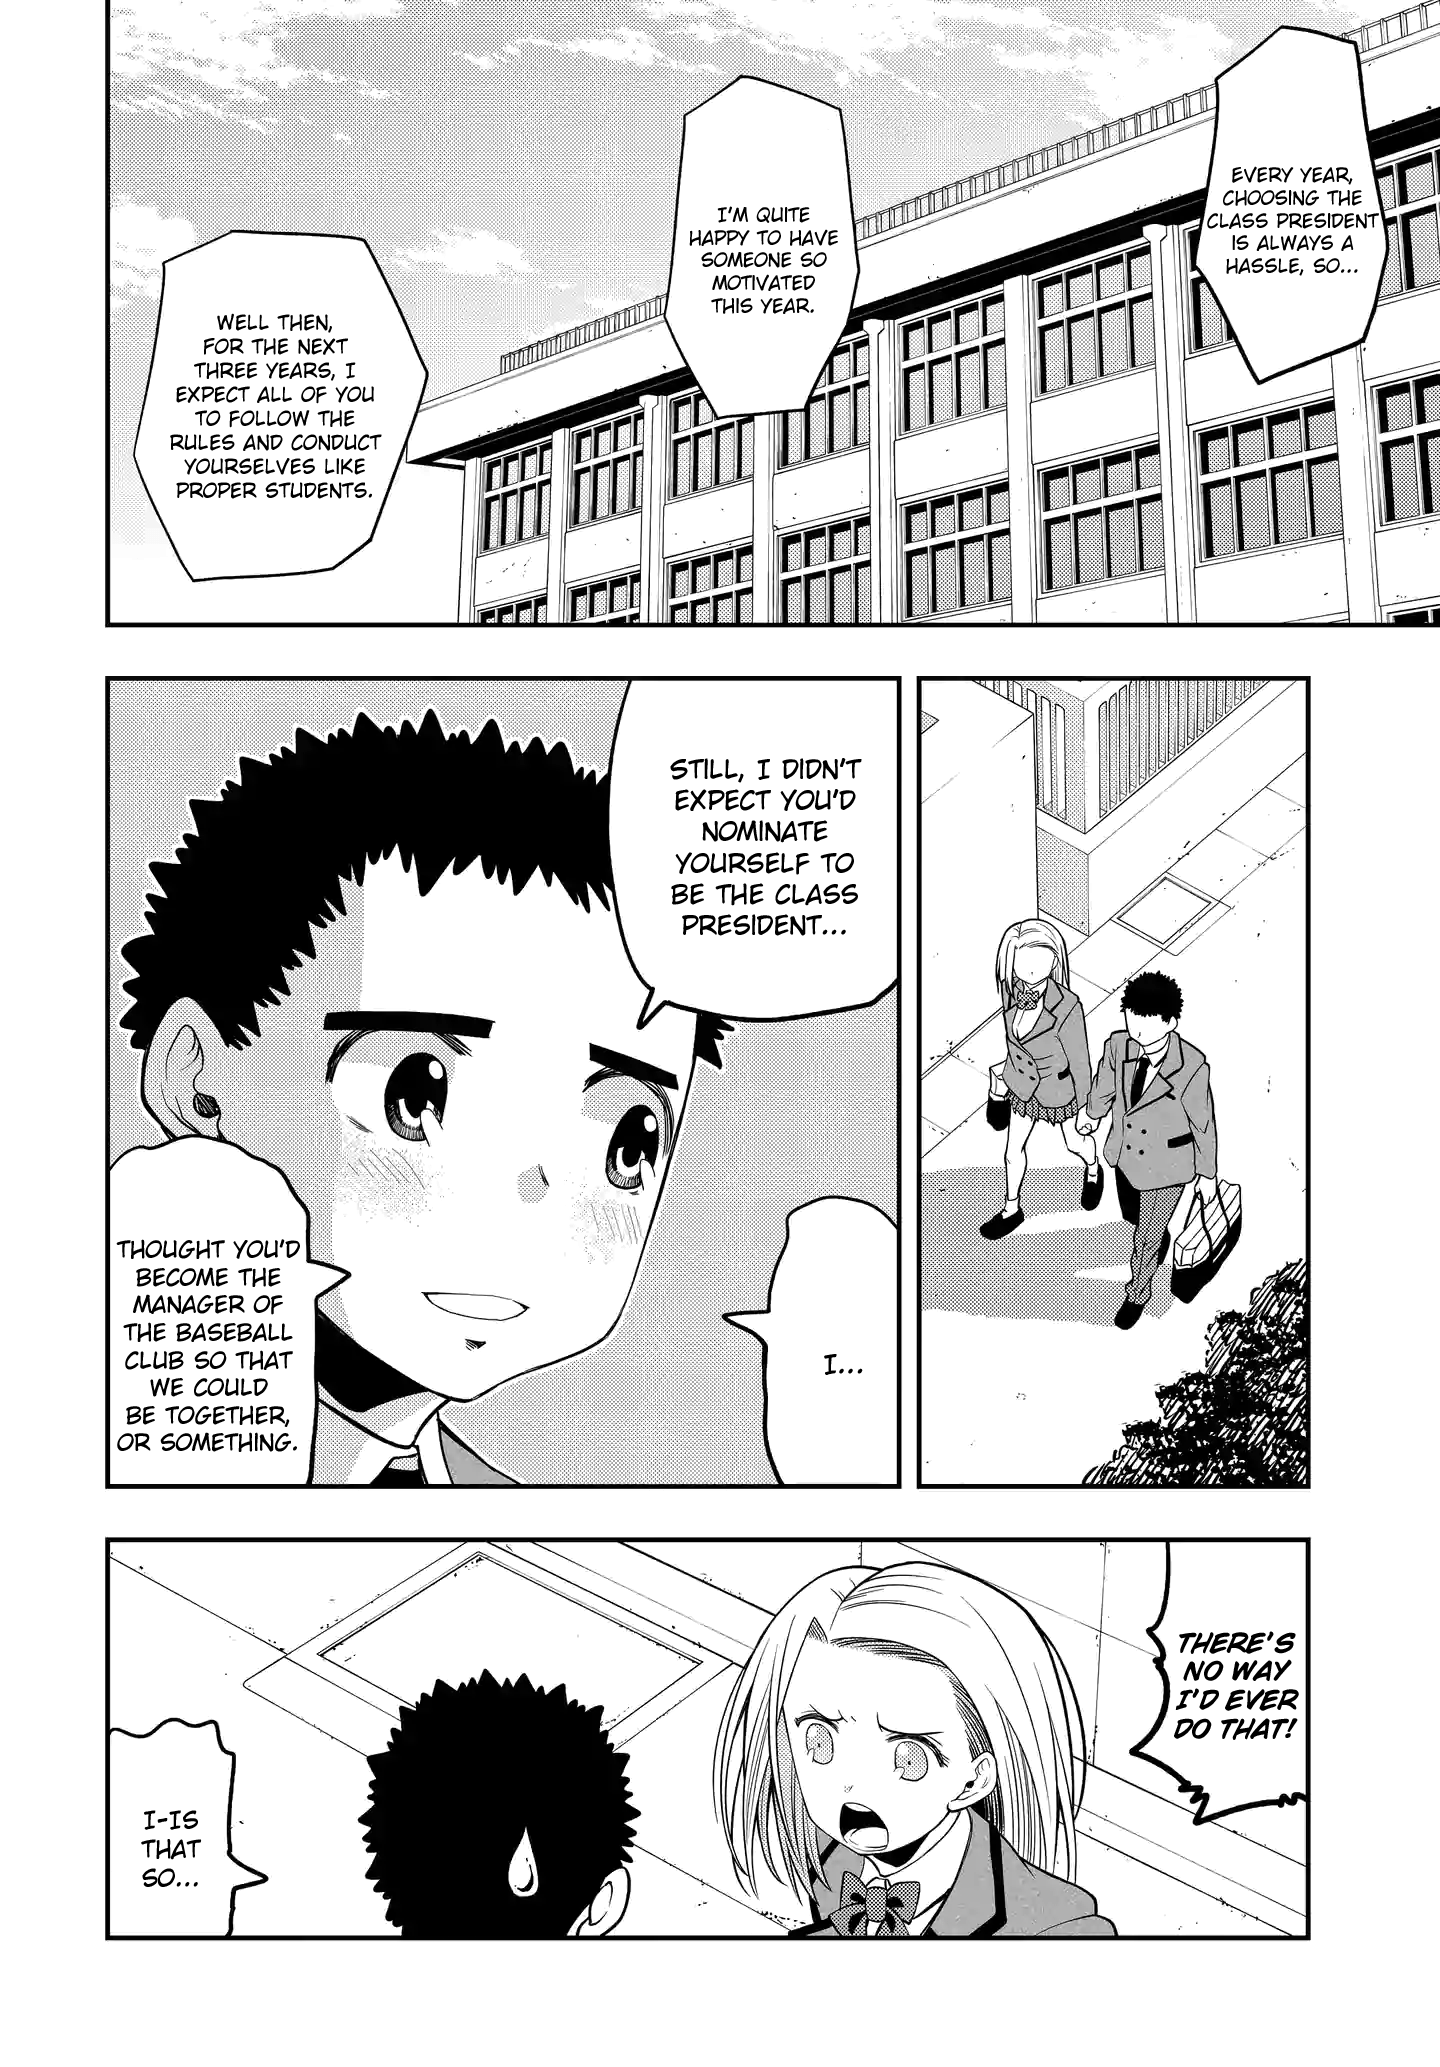 Omoi Ga Omoi Omoi-San Vol.1 Chapter 19: Following The Rules Like Proper Students - Picture 2